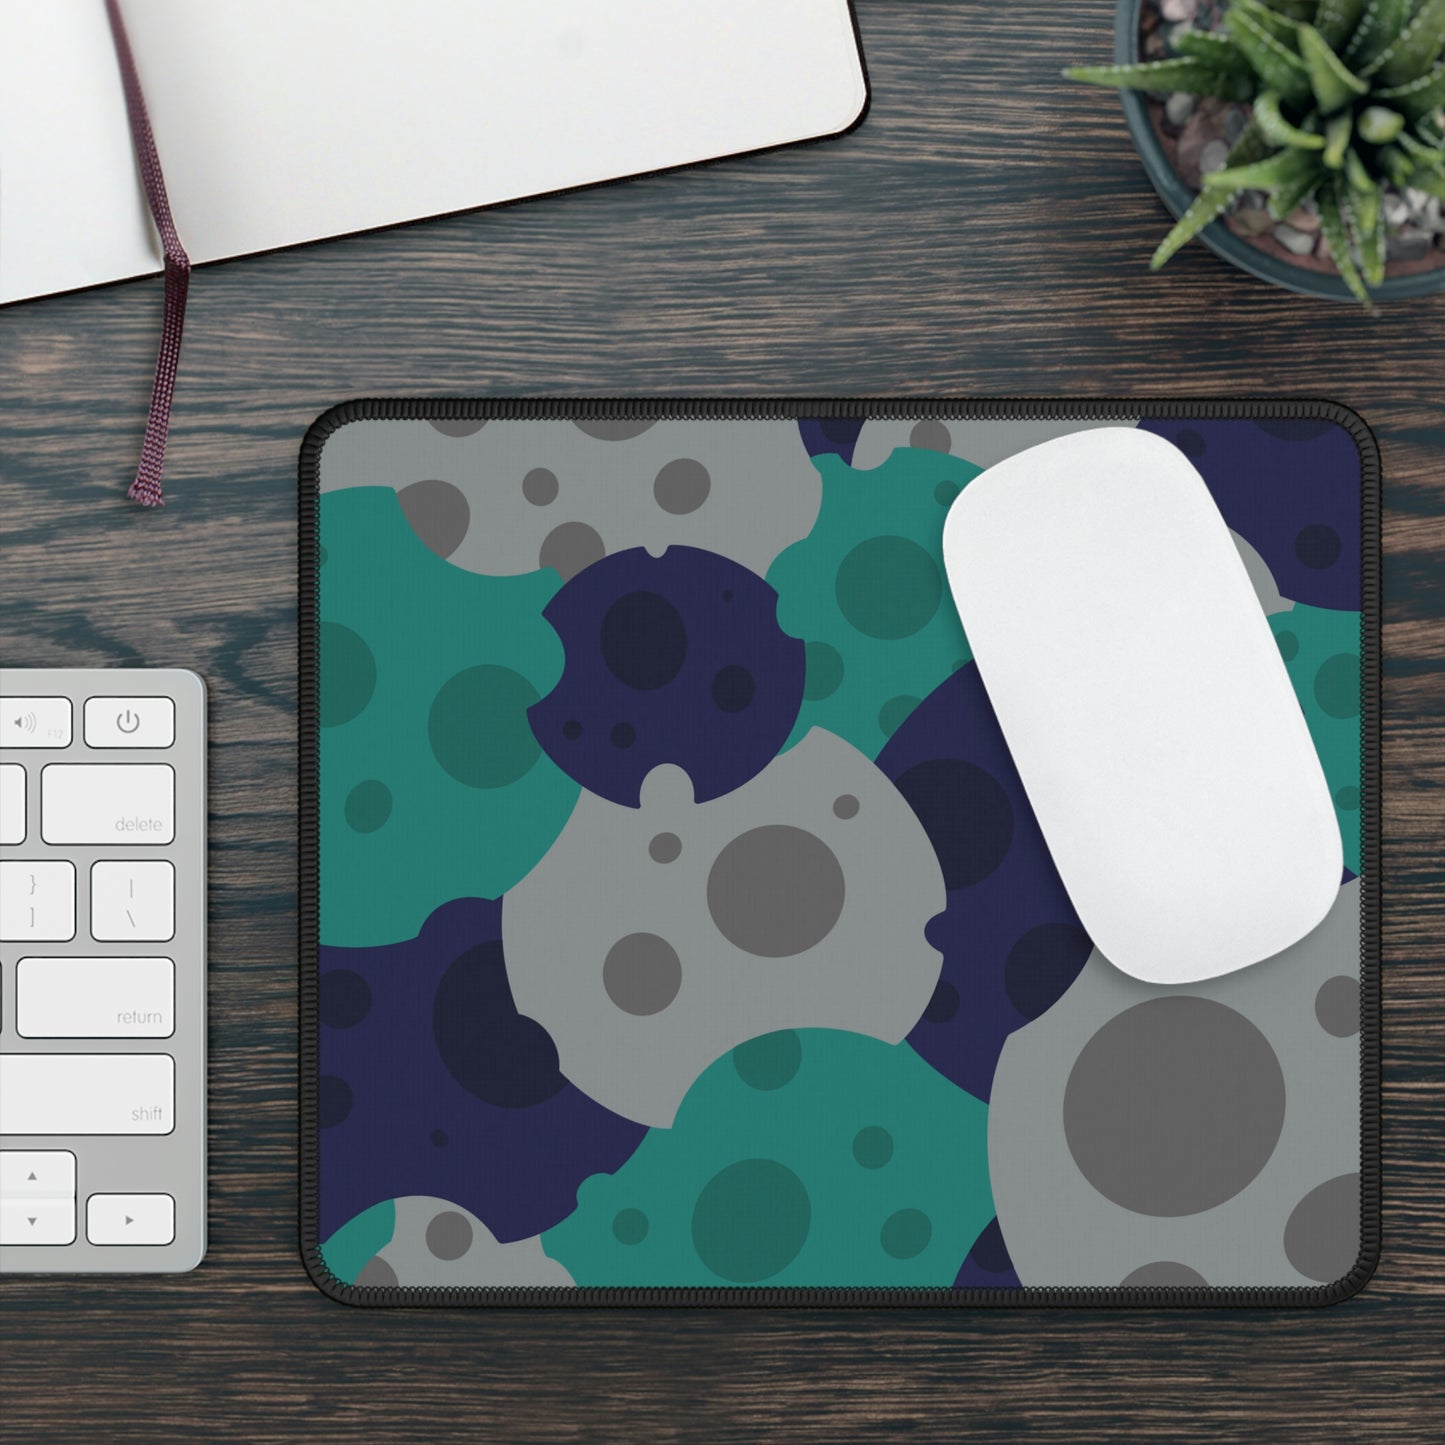 A gaming mouse pad with gray, teal, and dark blue meteorites sitting on a desk. A mouse sits on top of it.